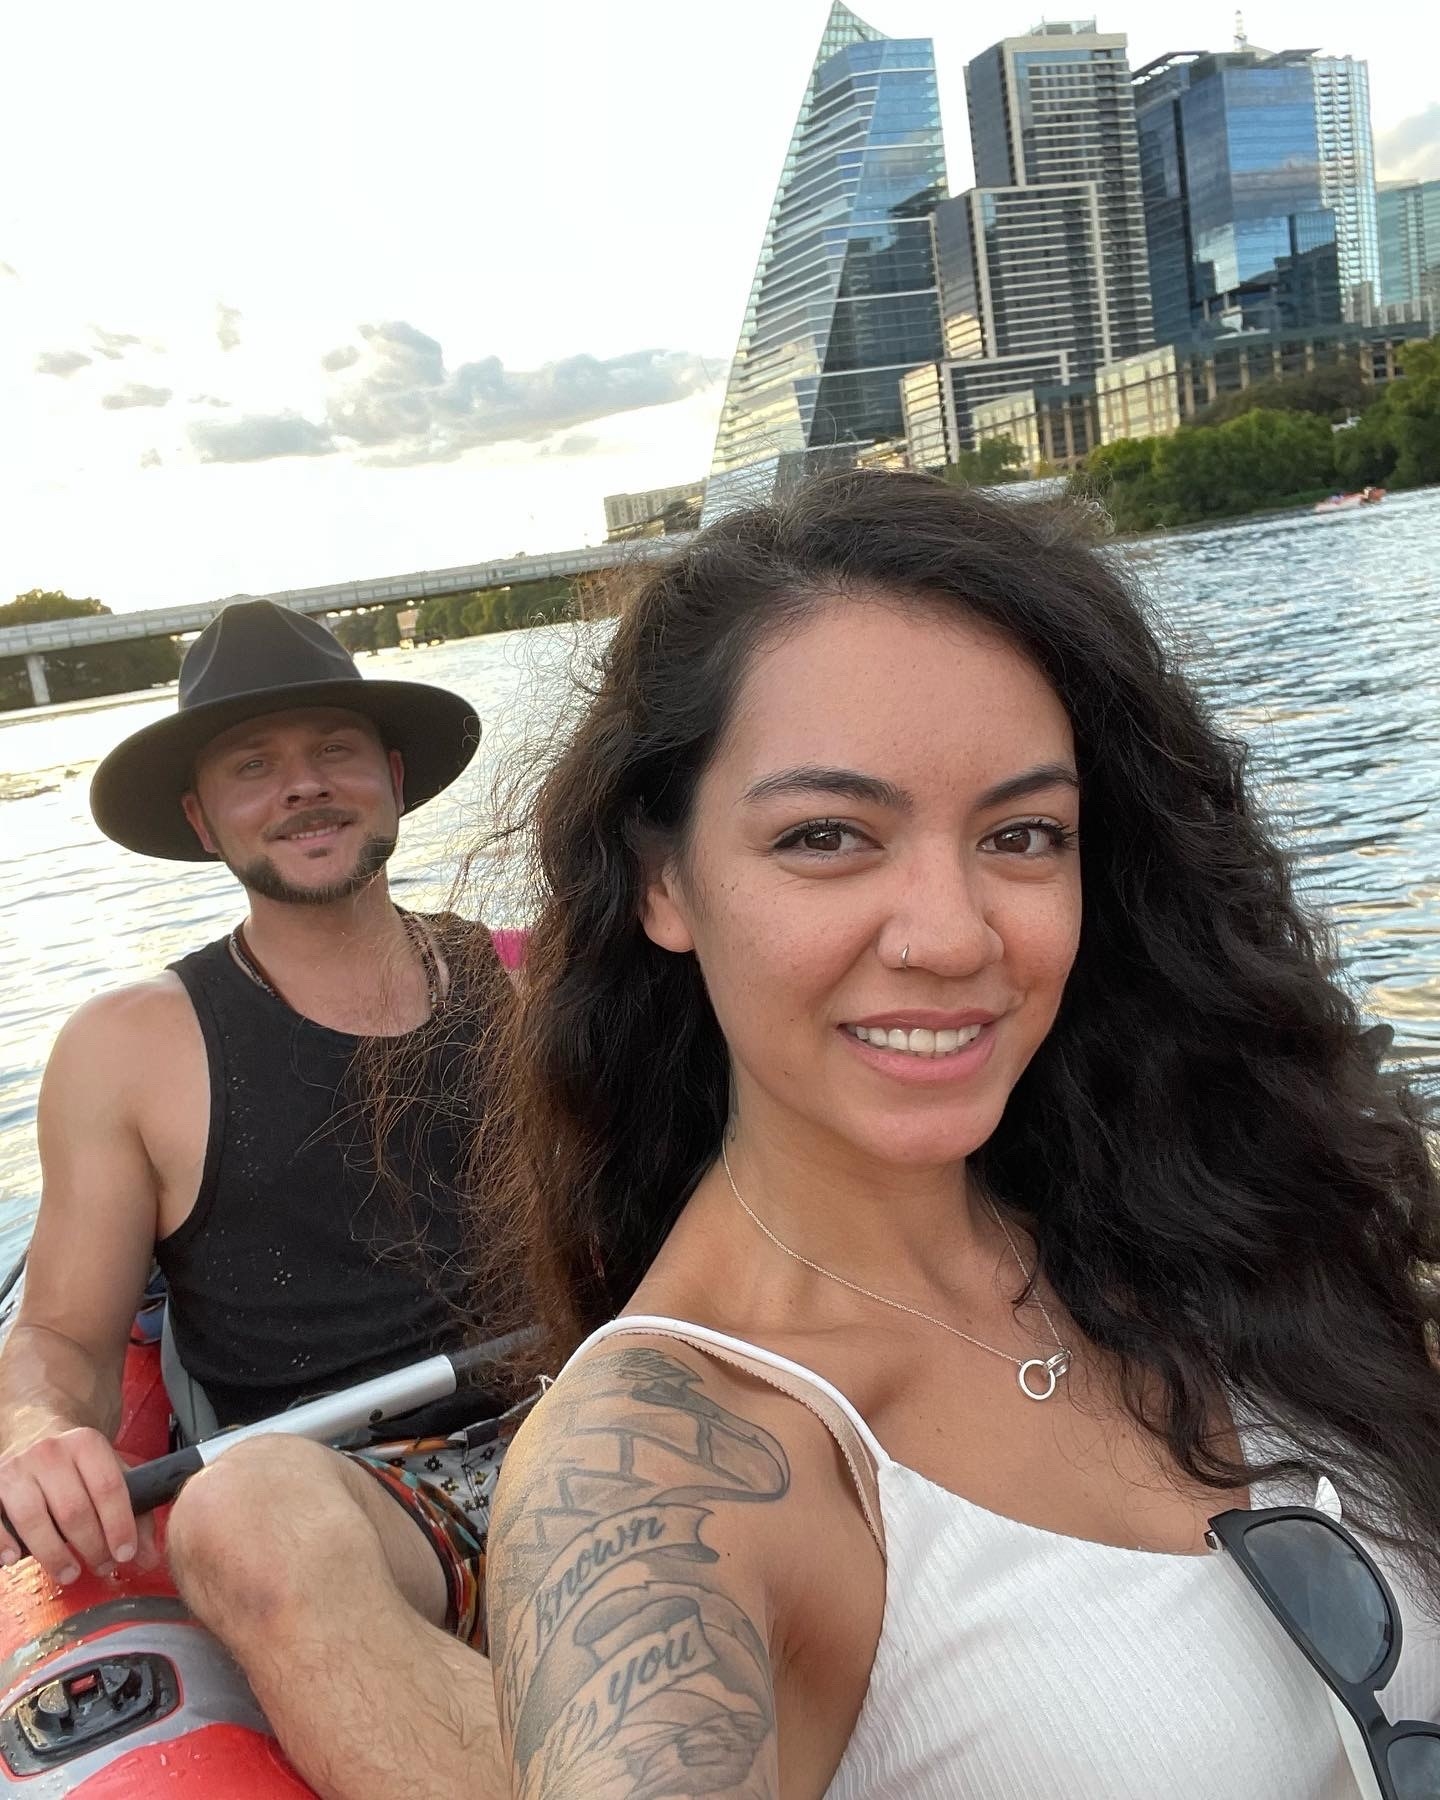 the two kayaking in austin